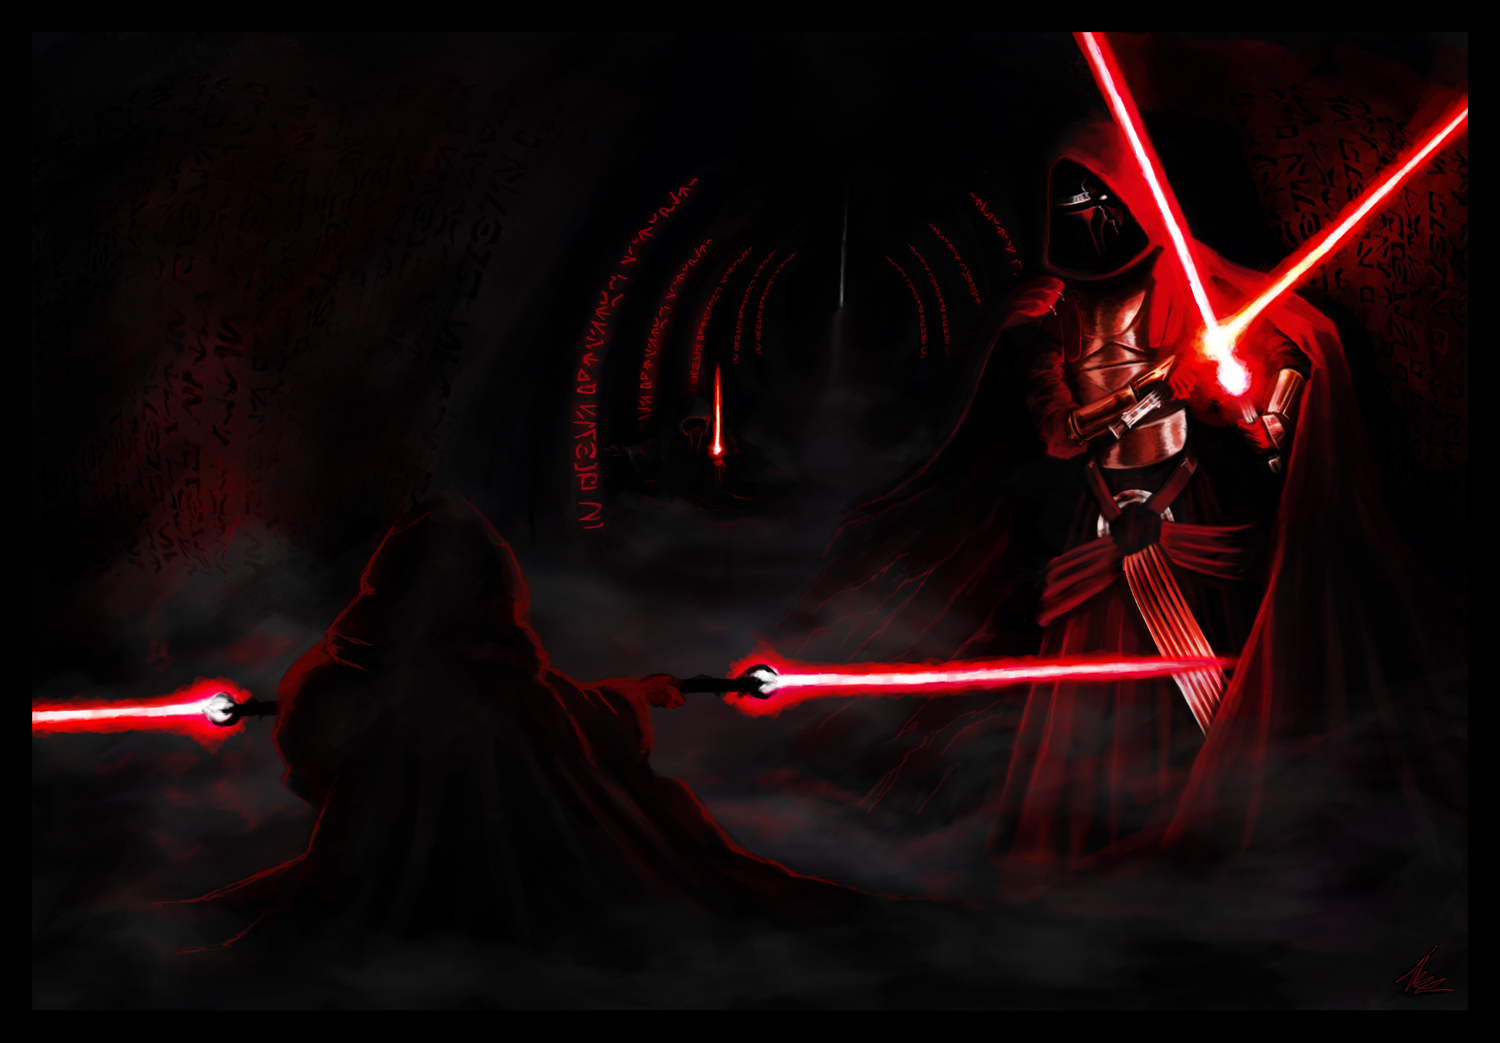 Free download Sith wallpaper HD download [1500x1043] for your Desktop, Mobile & Tablet. Explore Sith Wallpaper. Star Wars Wallpaper 1080p, Star Wars Sith Wallpaper, Best Sith Wallpaper